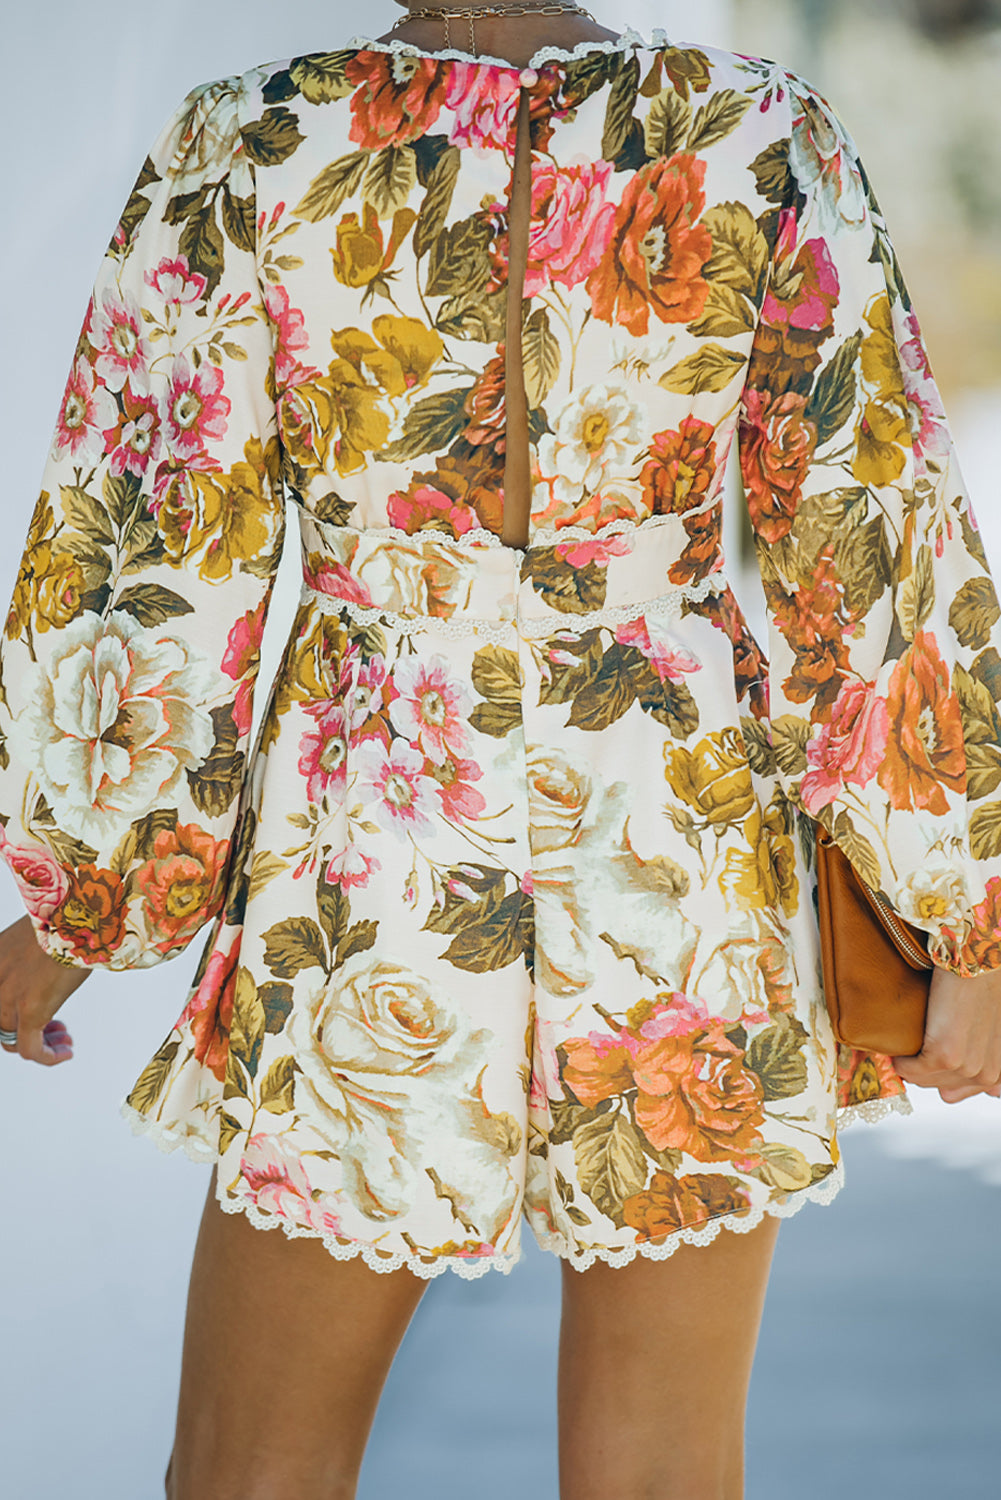 V-neck floral print romper with bishop sleeves and lace trim